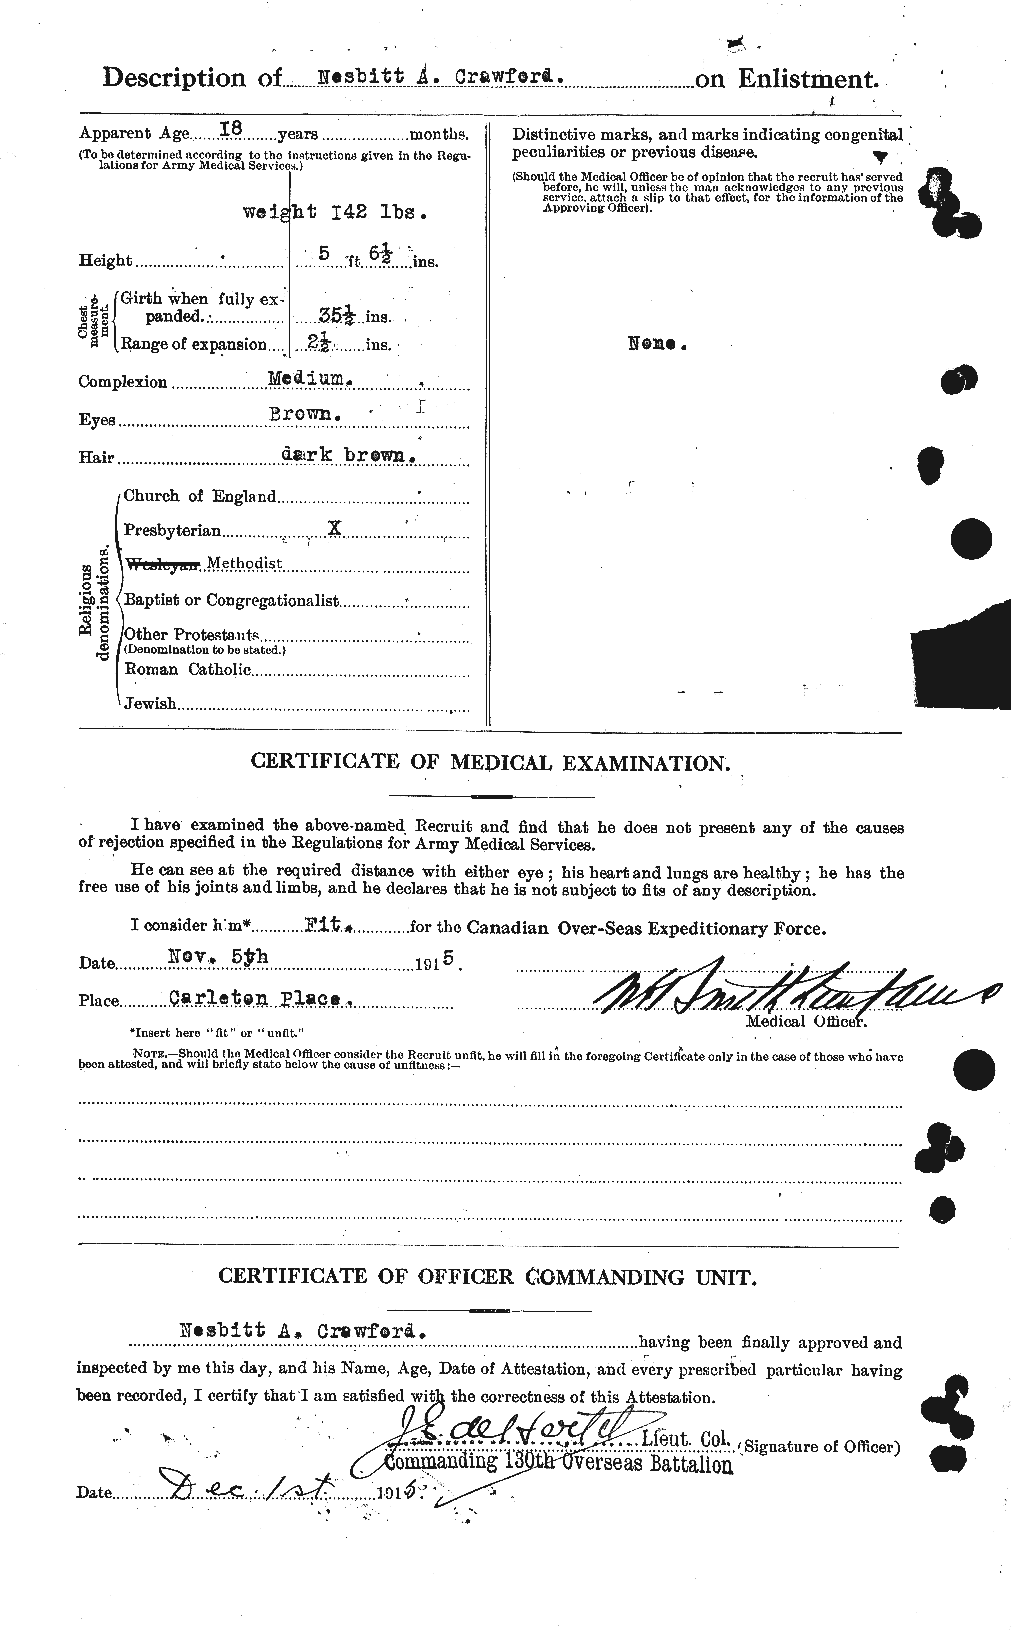 Personnel Records of the First World War - CEF 061663b